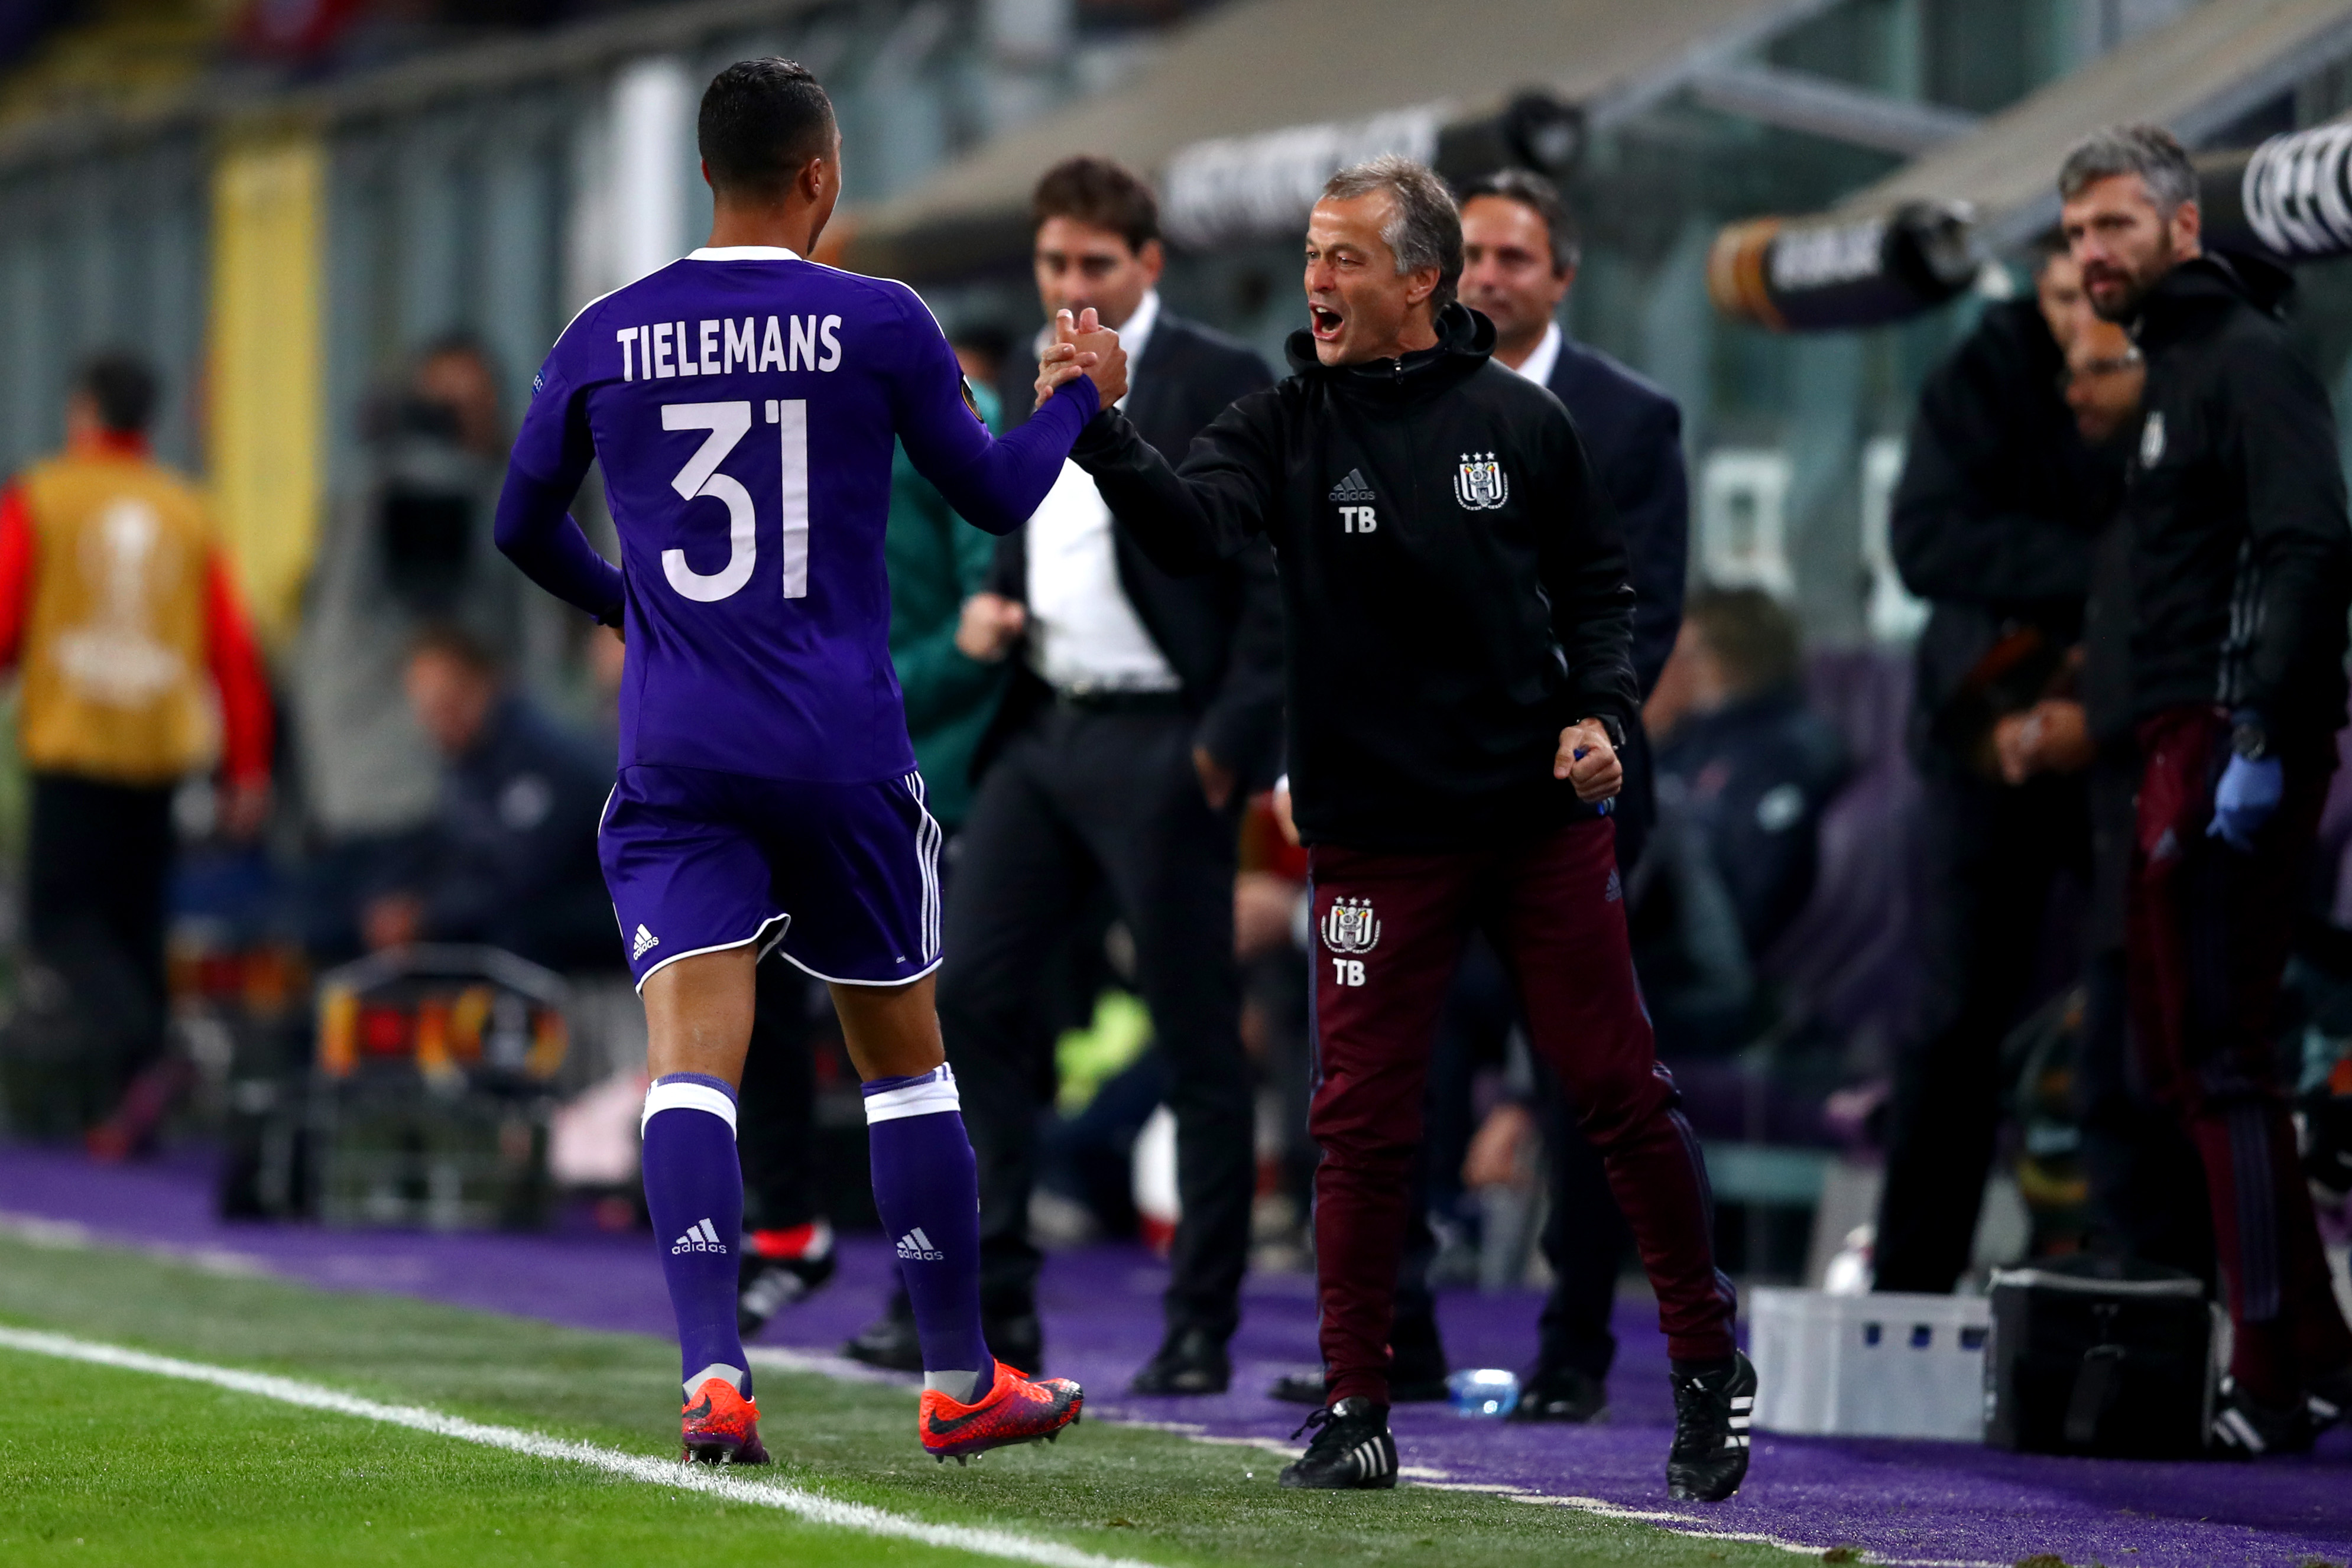 BRUSSELS, BELGIUM - NOVEMBER 03:  Youri Tielemans of RSC Anderlecht celebrates with members of the coaching staff after scoring his team's thirkd goal during the UEFA Europa League Group C match between RSC Anderlecht and 1. FSV Mainz 05 at Constant Vanden Stock Stadium on November 3, 2016 in Brussels, Belgium.  (Photo by Dean Mouhtaropoulos/Getty Images)